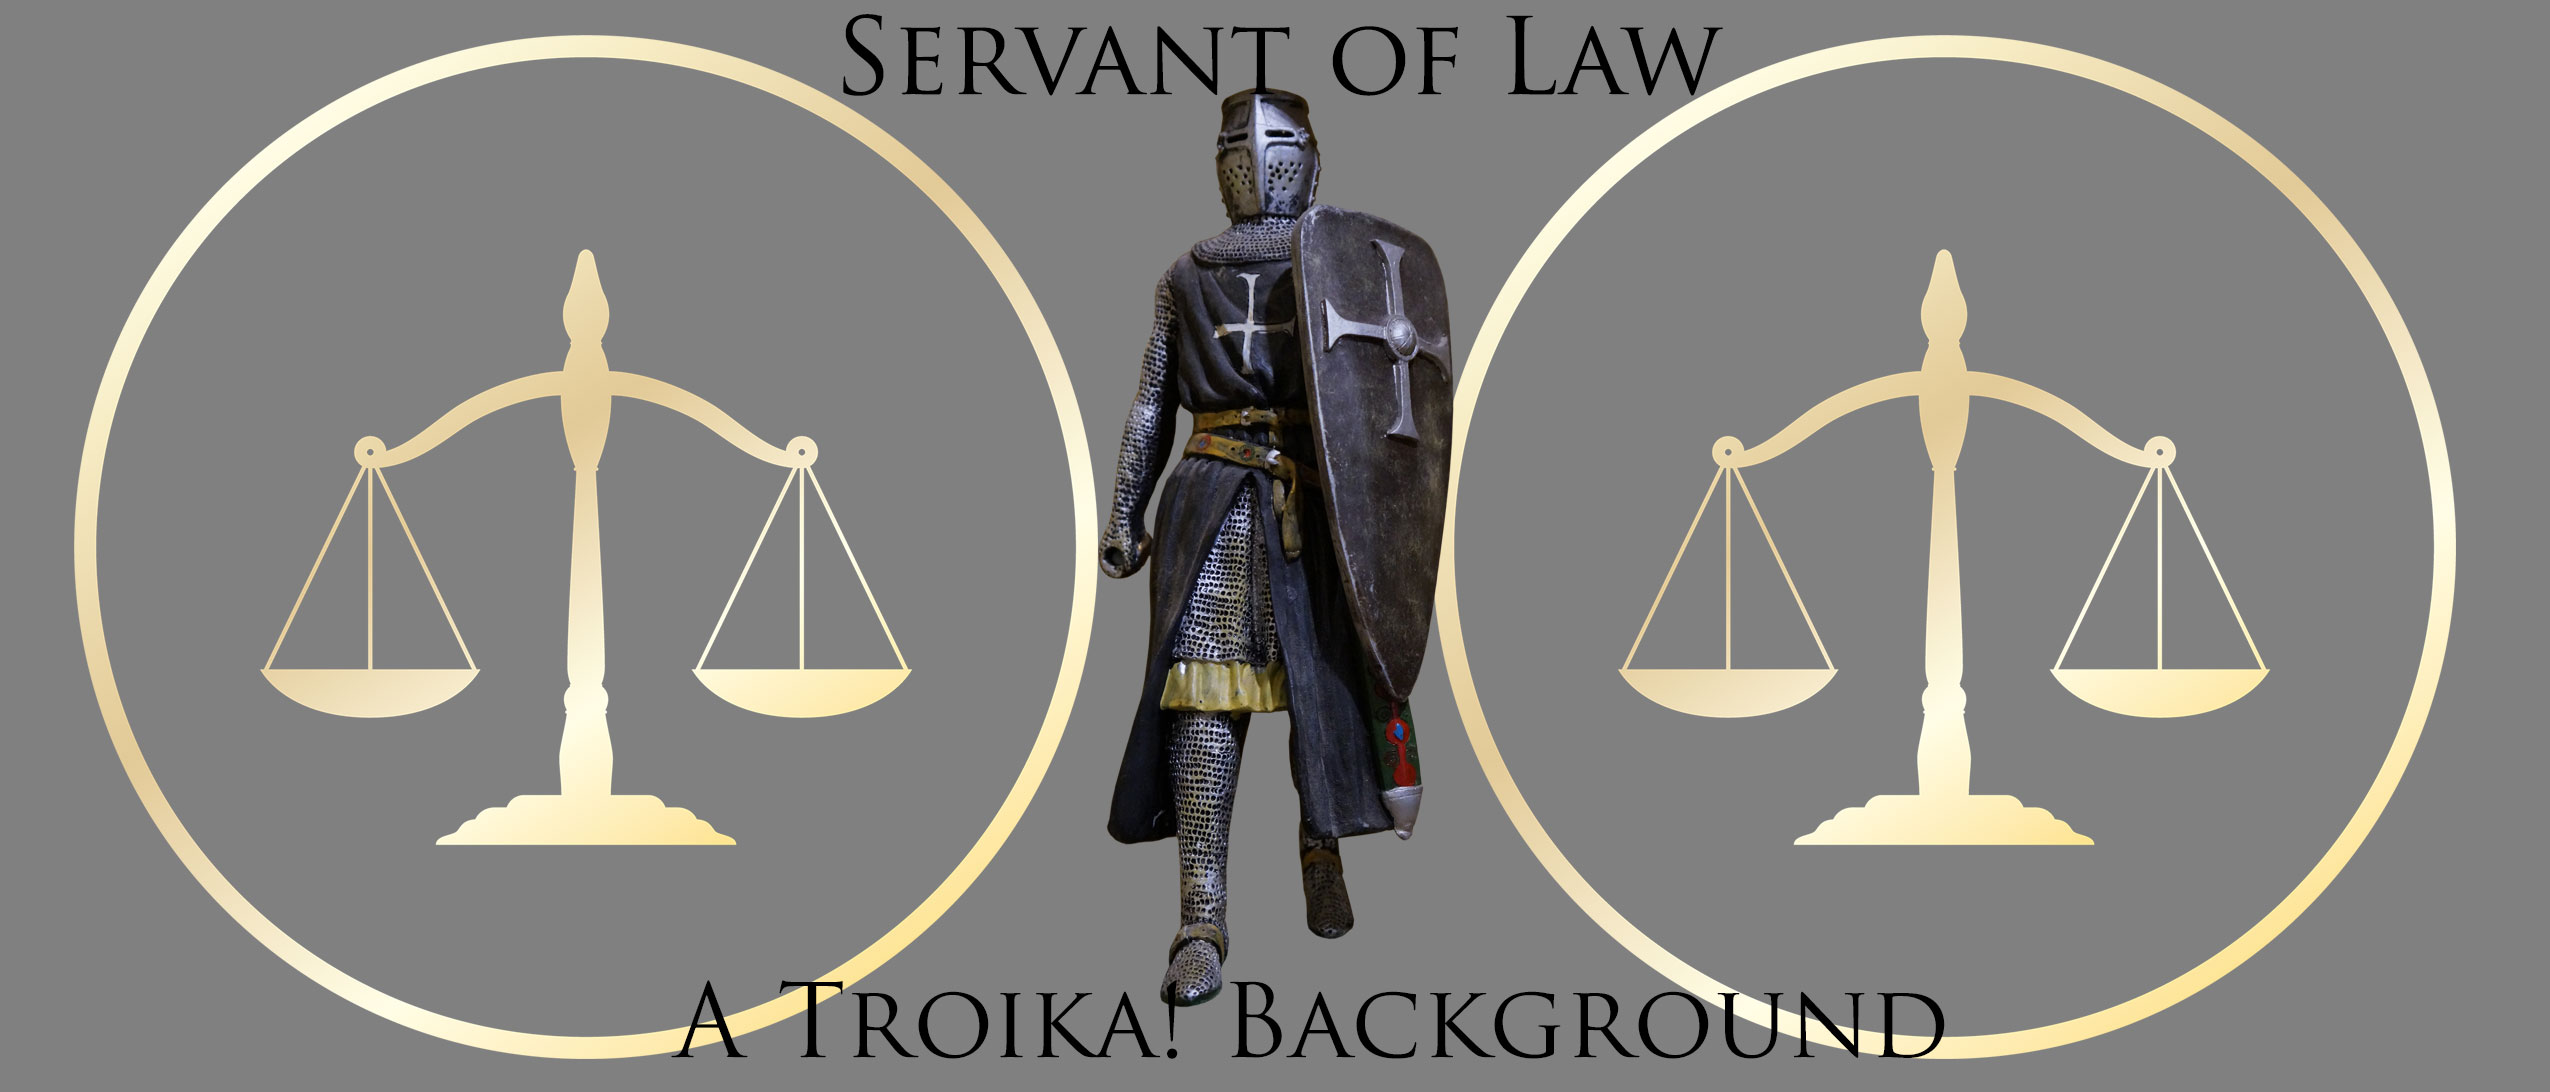 Servant of Law - A Troika! Background